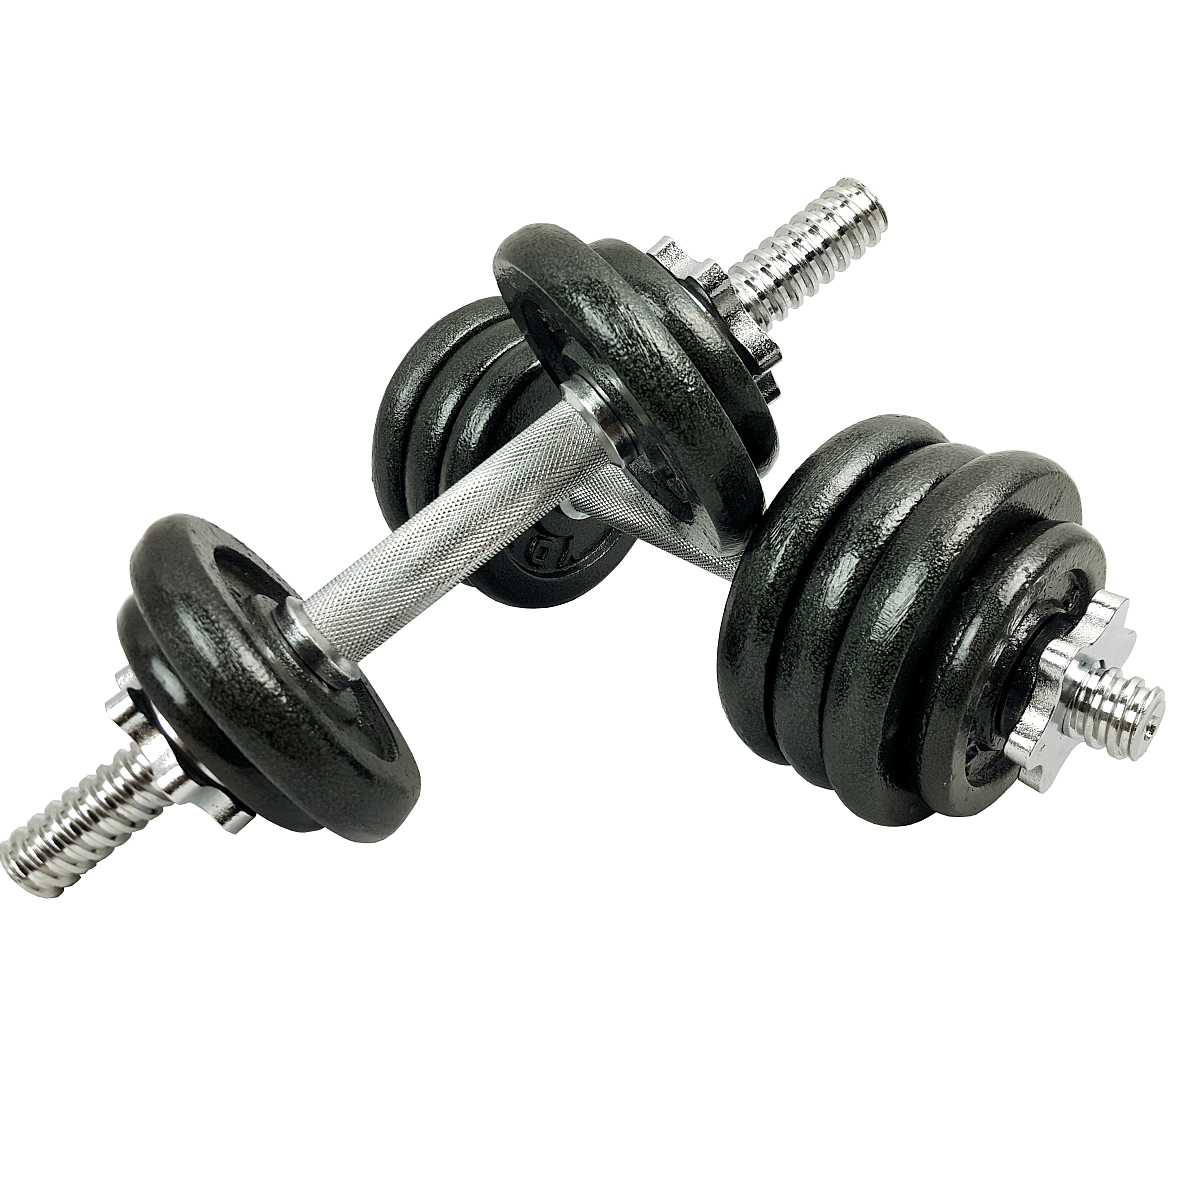 15 Kg Dumbbell Set With Case 2 The Fitness 15 Kg Cast Iron Dumbbell Set Is Designed For Home Toning And Strength Workout Usage. The Traditional 1&Quot; Standard Cast Plate Design Is Easy To Pick Up And Load Onto The Bars With The Quality Spinlock Collars Ensuring A Safe And Secure Fit On The Bar, Along With Quick Plate Changes. The Knurled Black Dumbbell Sleeves Ensures A Great Grip Whilst Working Out. The Dumbbell Set Can Be Used For A Wide Range Of Exercises To Help Pump Your Muscles And Tone Your Arms. The Set Lets You Adjust The Lifting Weight Up To A Maximum Of Two 7.5 Kg Dumbbells. Dumbbell Set 15 Kg With Packing Case Dumbbell Set 15 Kg With Packing Case